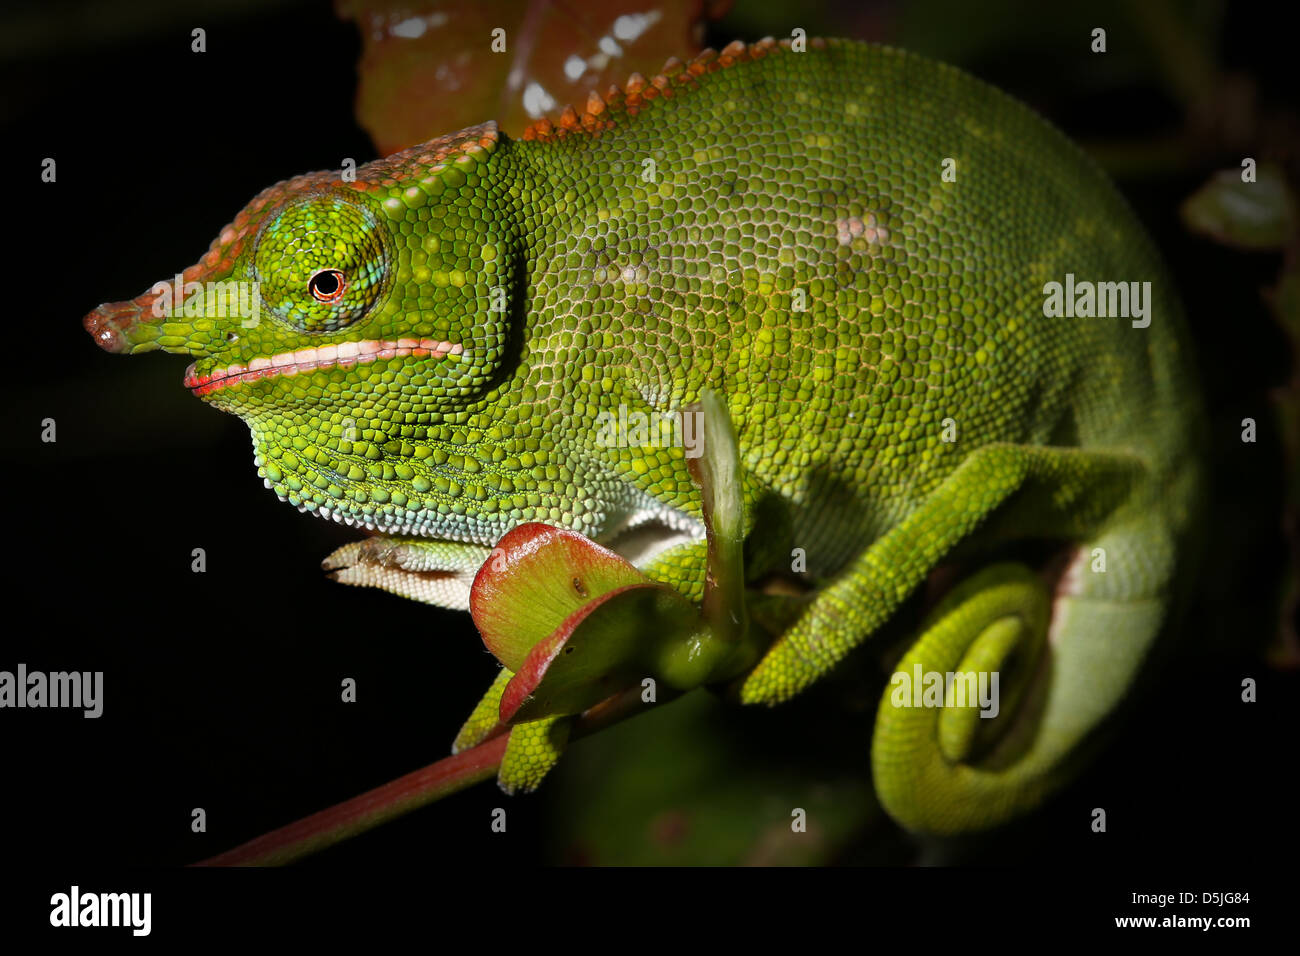 Male Canopy or Will's Chameleon (Furcifer willsii) on a branch in the wilds of Madagascar (Rain Forest of Ranomafana). Stock Photo